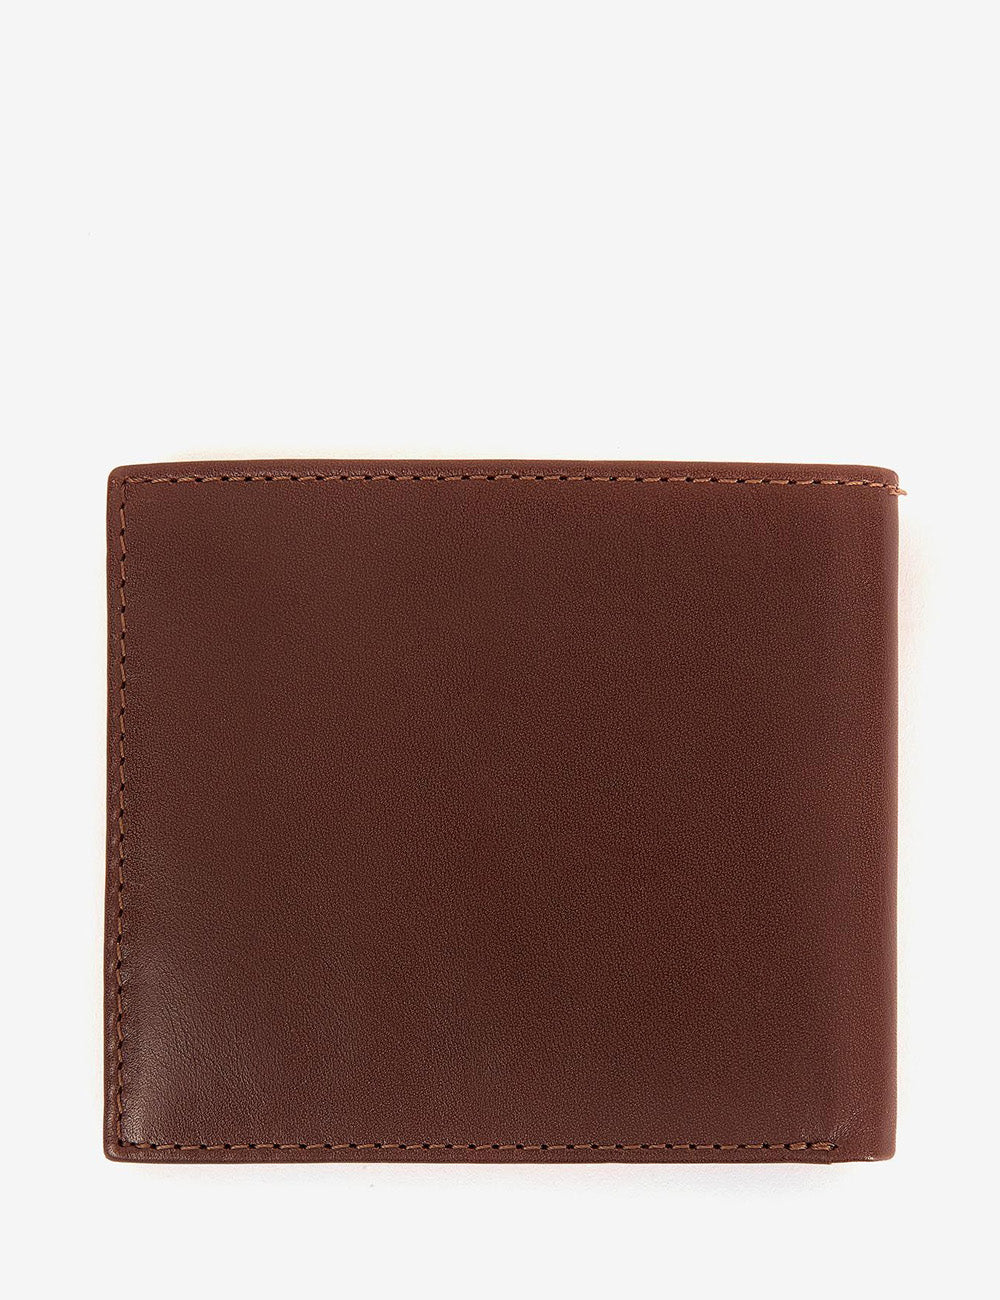 Barbour Colwell Billfold Wallet - Brown/Classic Tartan